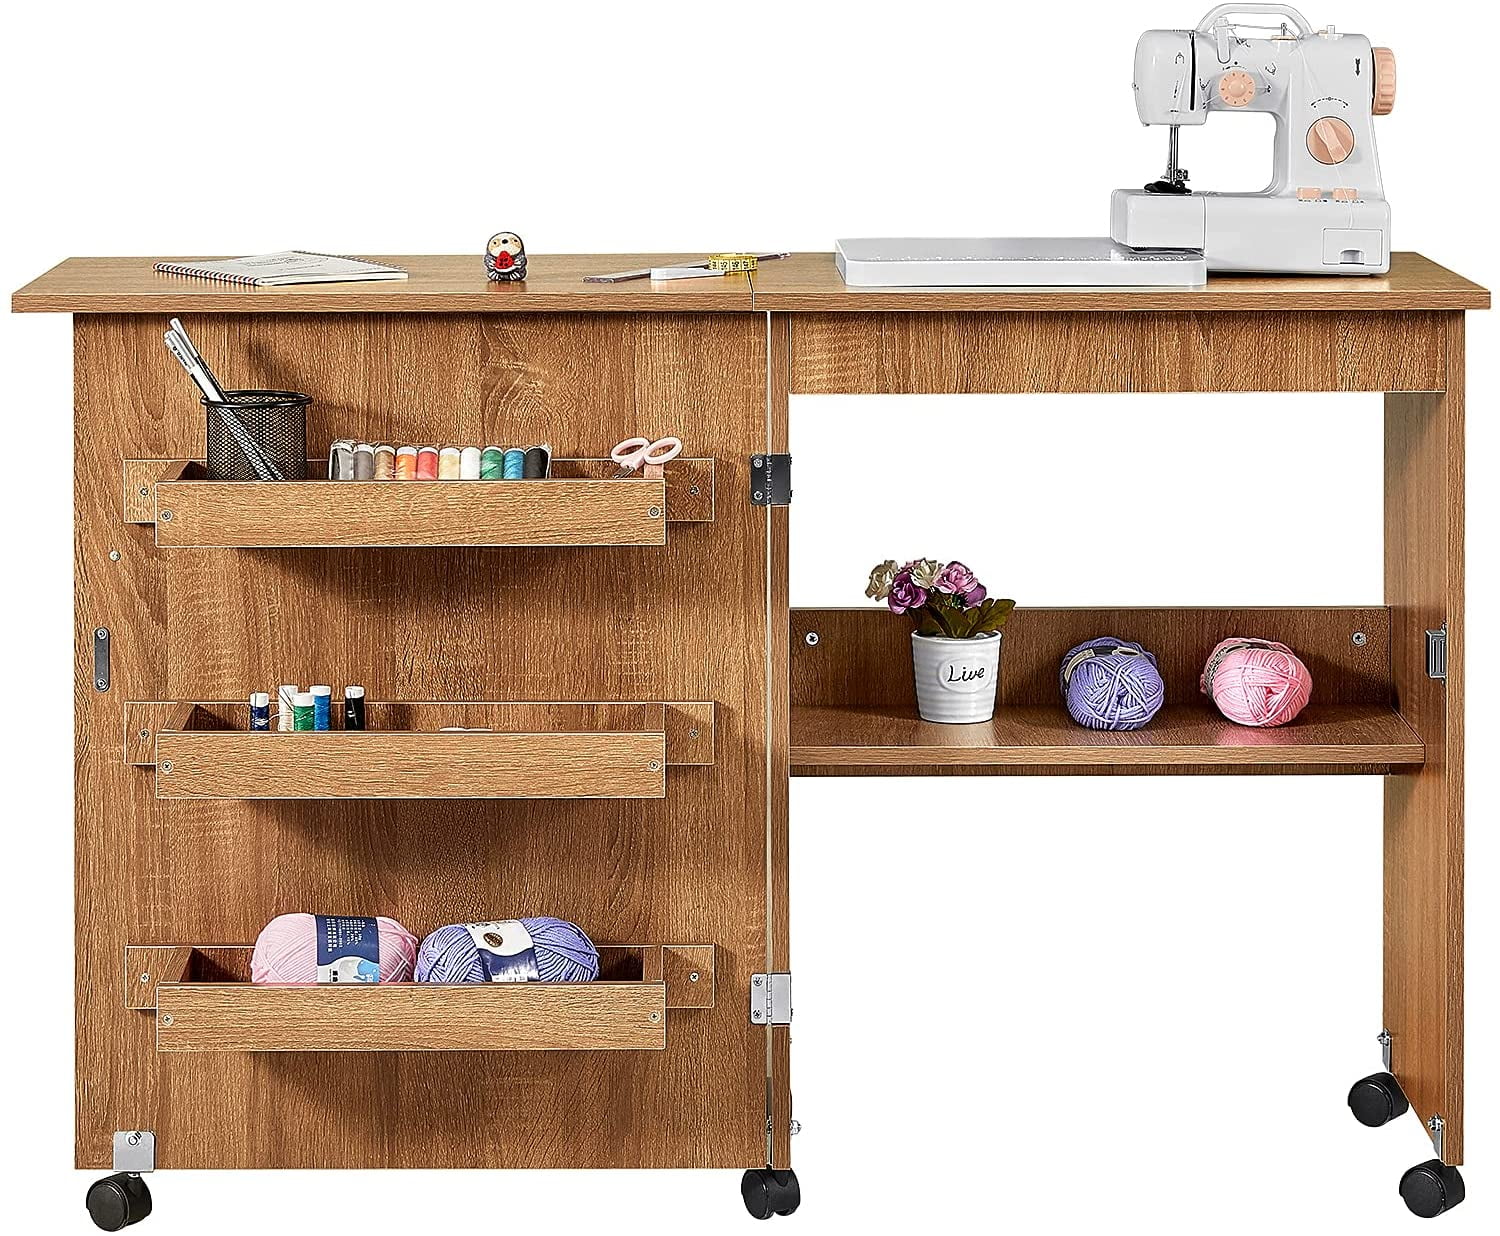 White Folding Sewing Table Multifunctional Sewing Machine Cart Table Sewing Craft Cabinet with Storage Shelves Portable Rolling Sewing Desk Computer Desk with Lockable Casters 